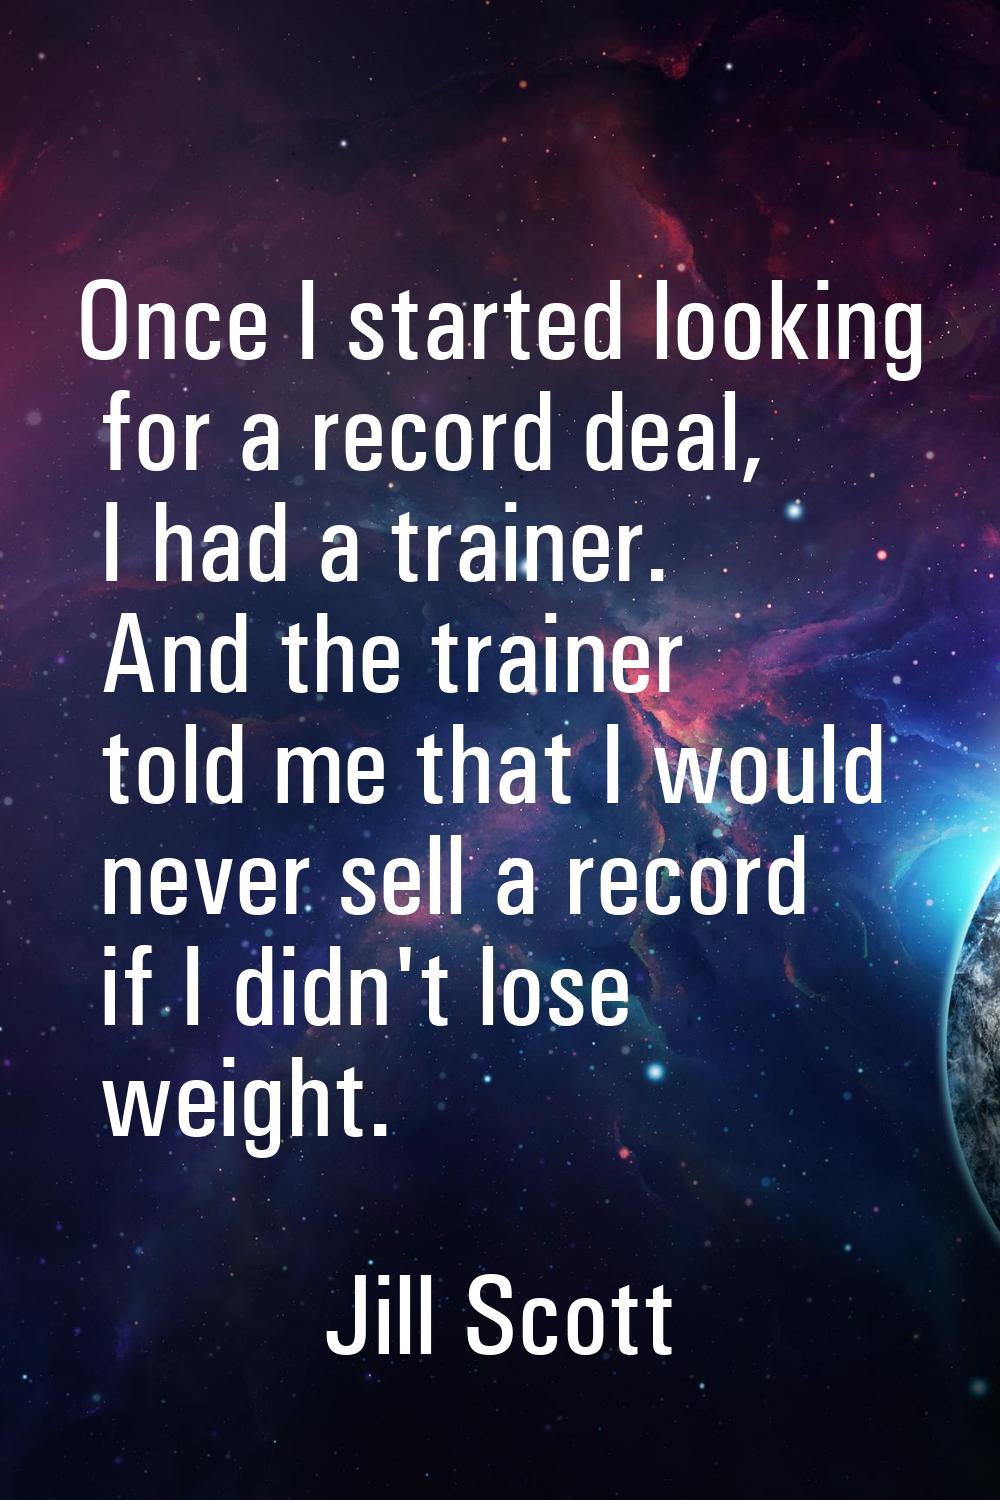 Once I started looking for a record deal, I had a trainer. And the trainer told me that I would nev